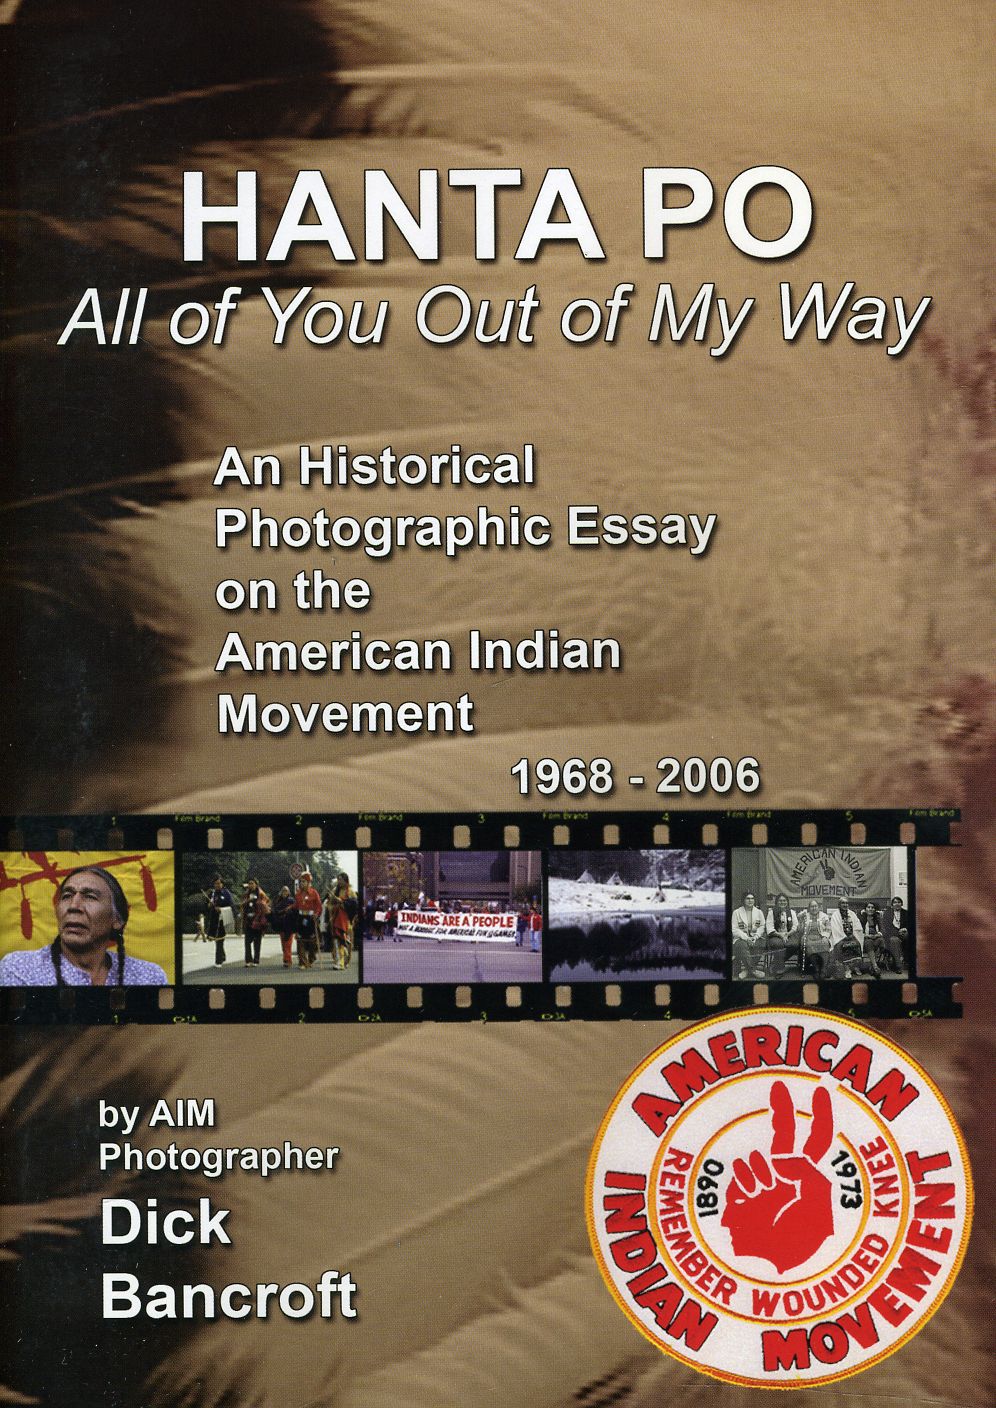 HANTA PO: ALL OF YOU OUT OF MY WAY 1968-2006